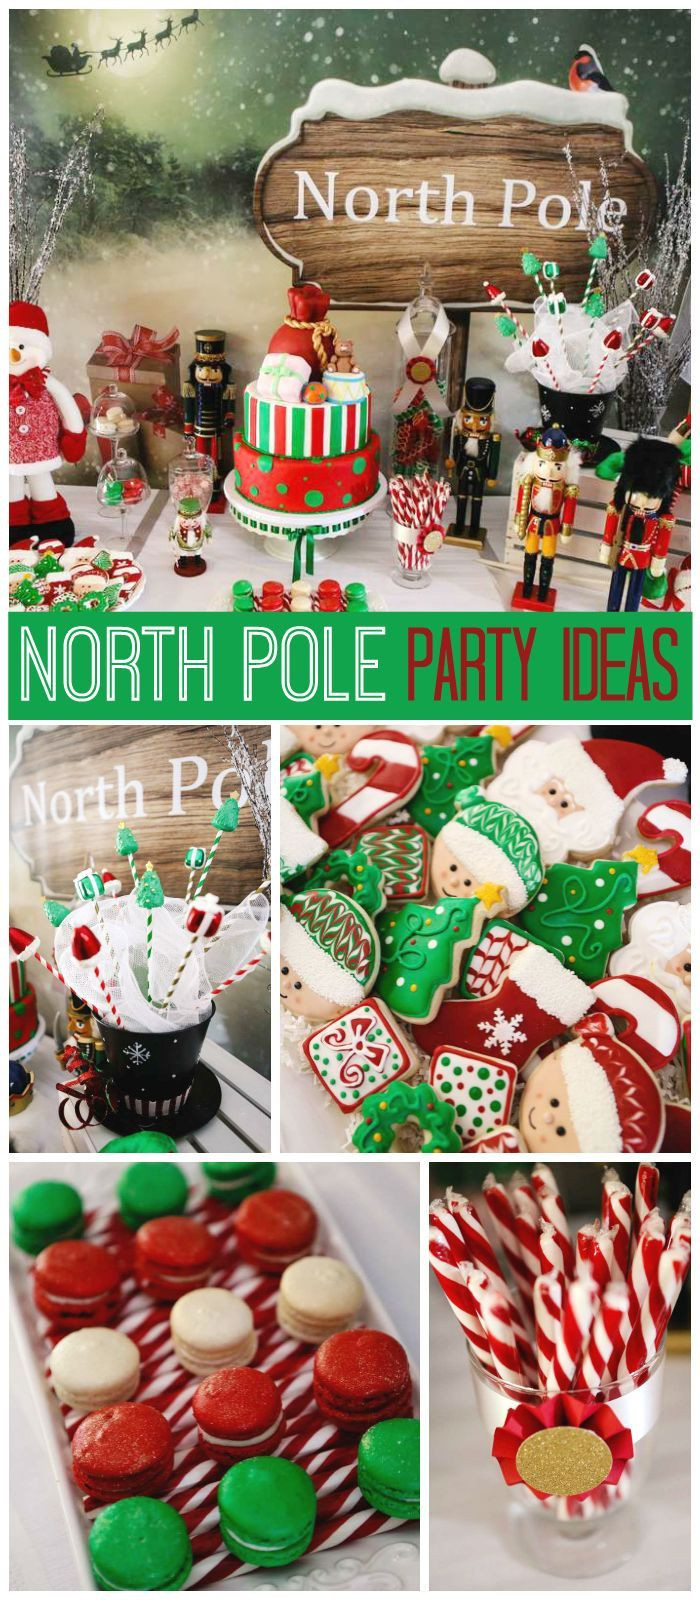 Toddler Christmas Party Ideas
 Pin by Kendra Goodrich